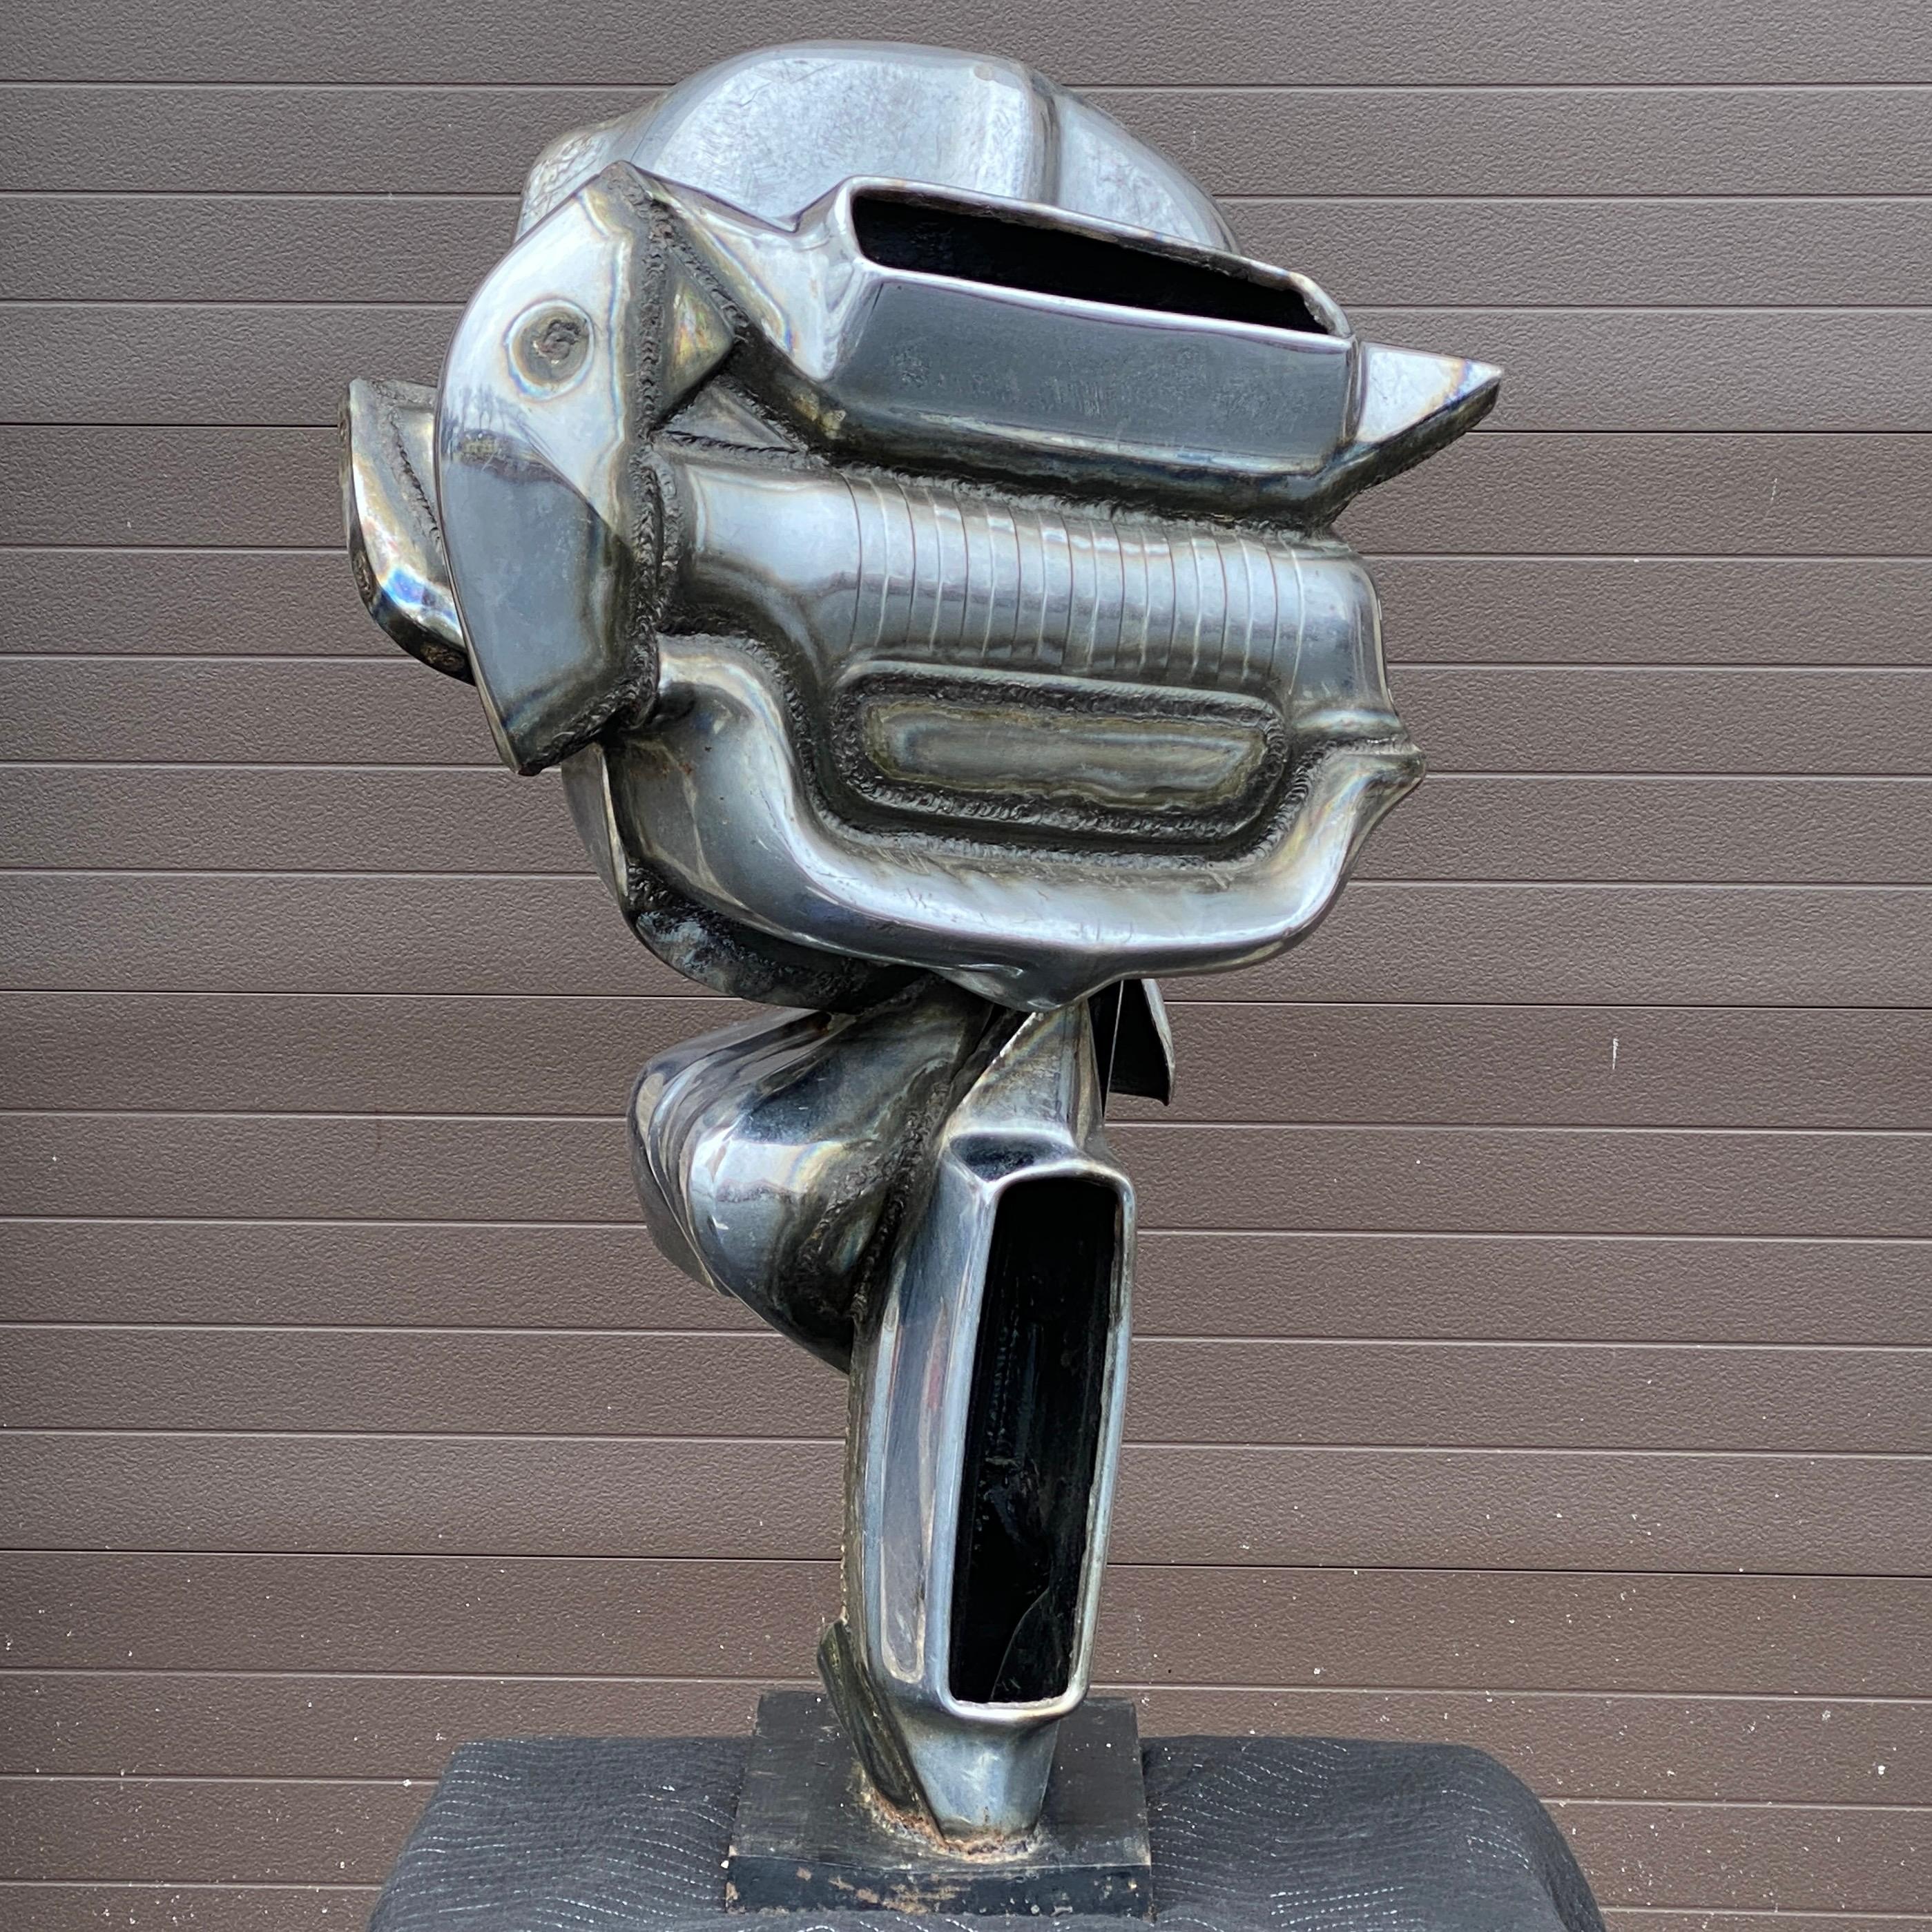 Mid-20th Century Welded Chrome Automobile Bumper Abstract Sculpture by Jason Seley, '1919-1983' For Sale